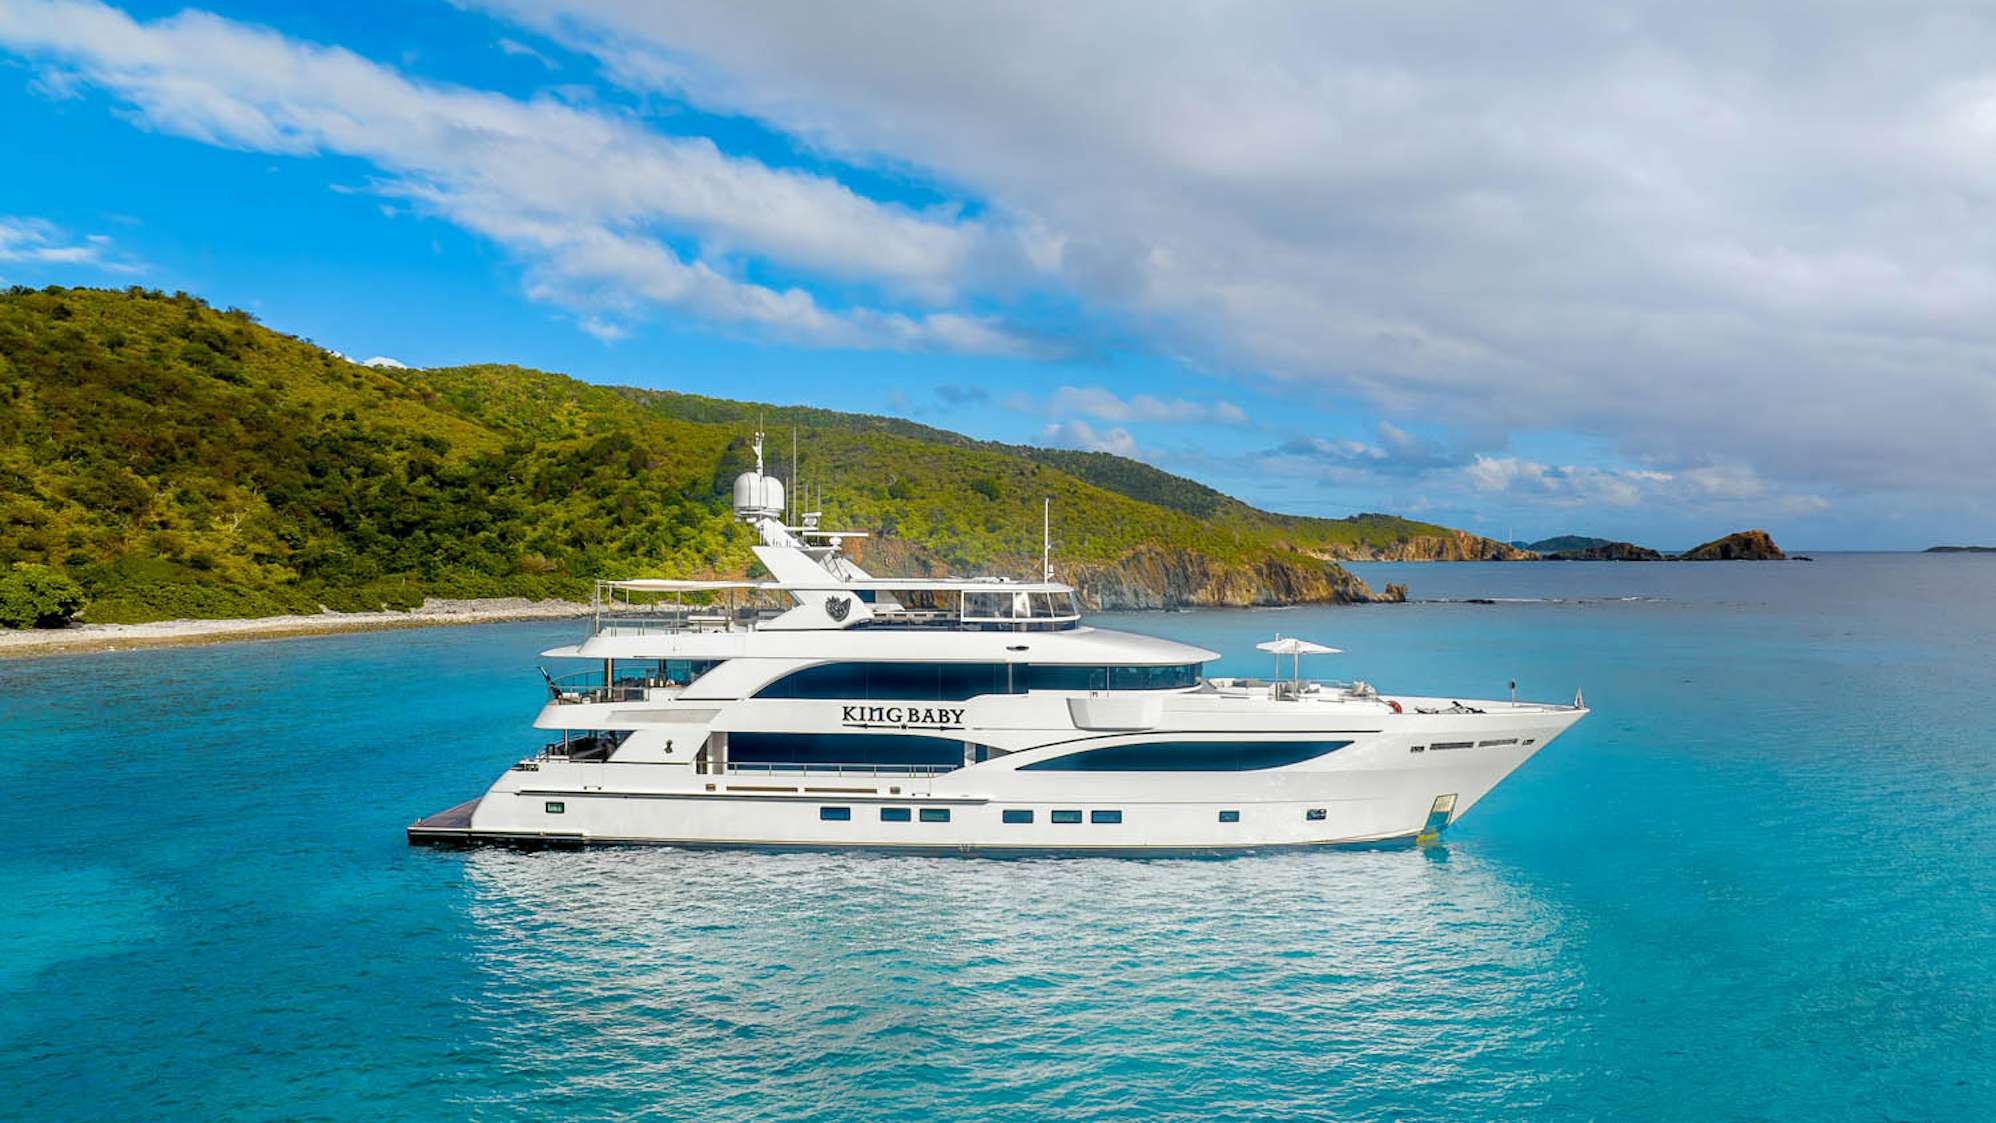 Watch Video for KING BABY Yacht for Charter